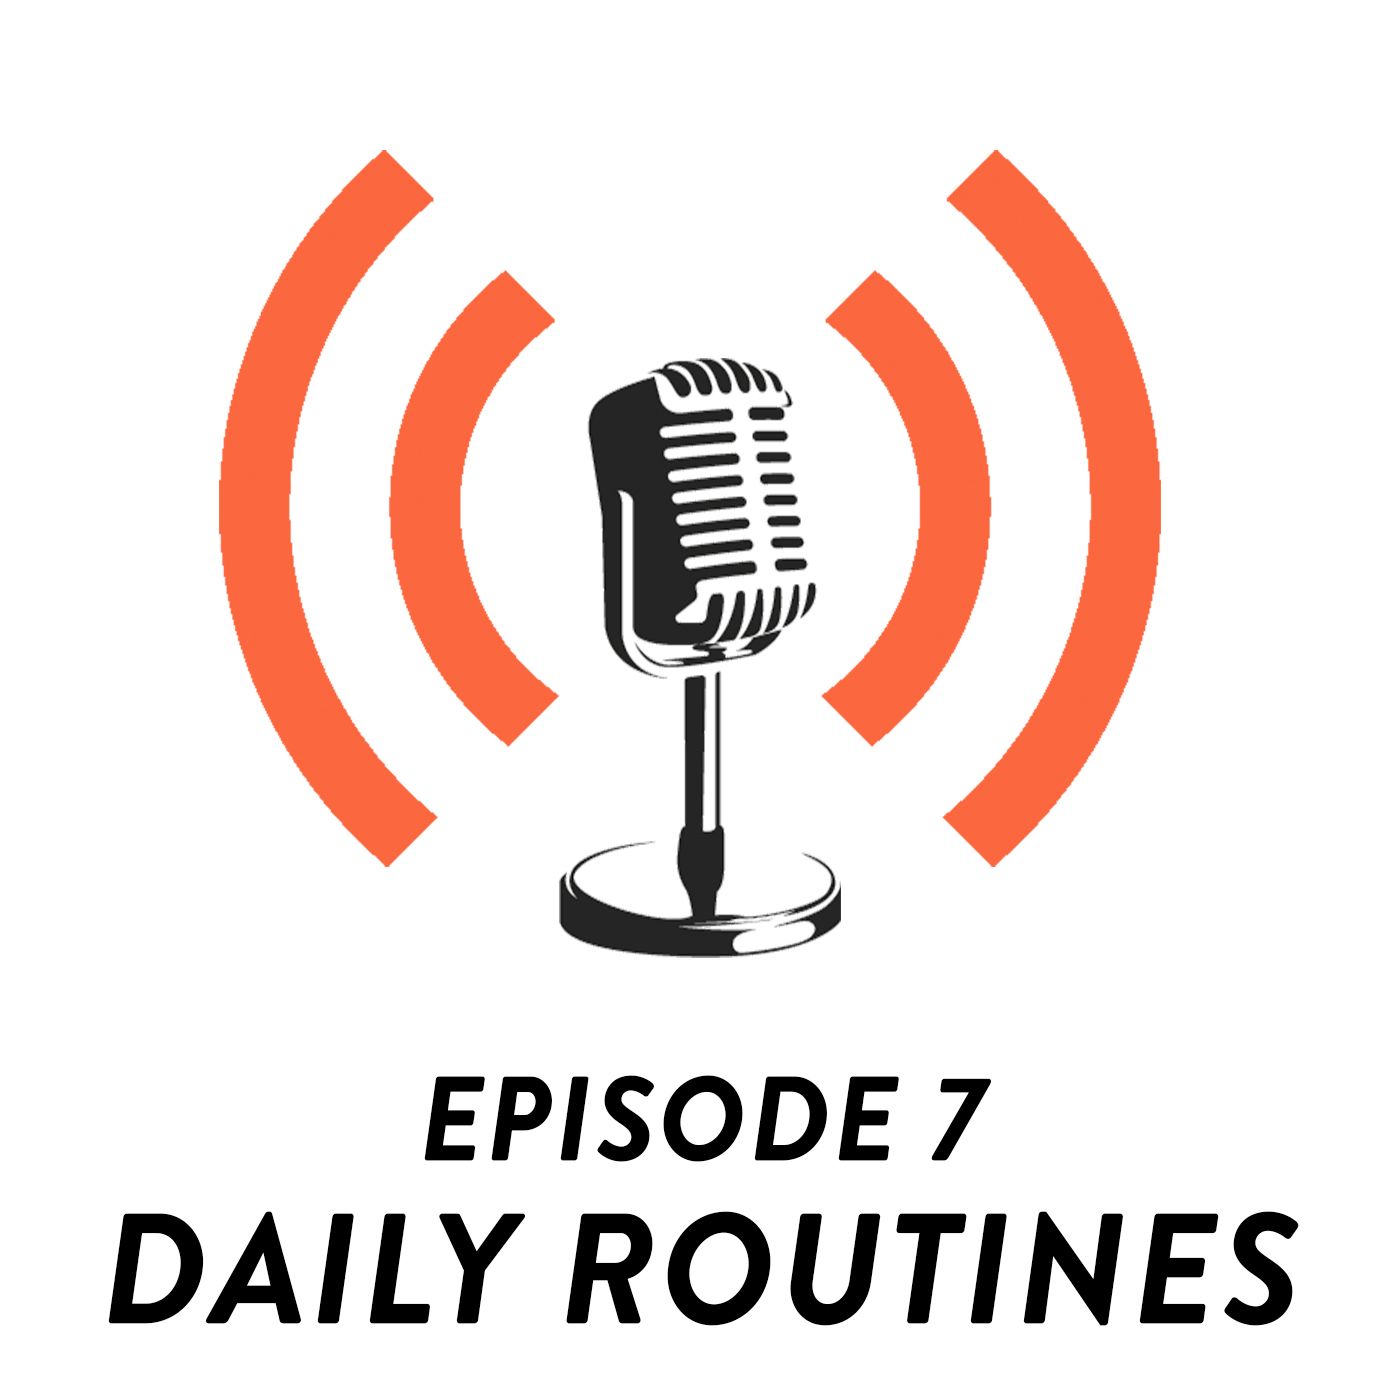 S01E07 - Groundhog Daily: Adapting To Routine Changes